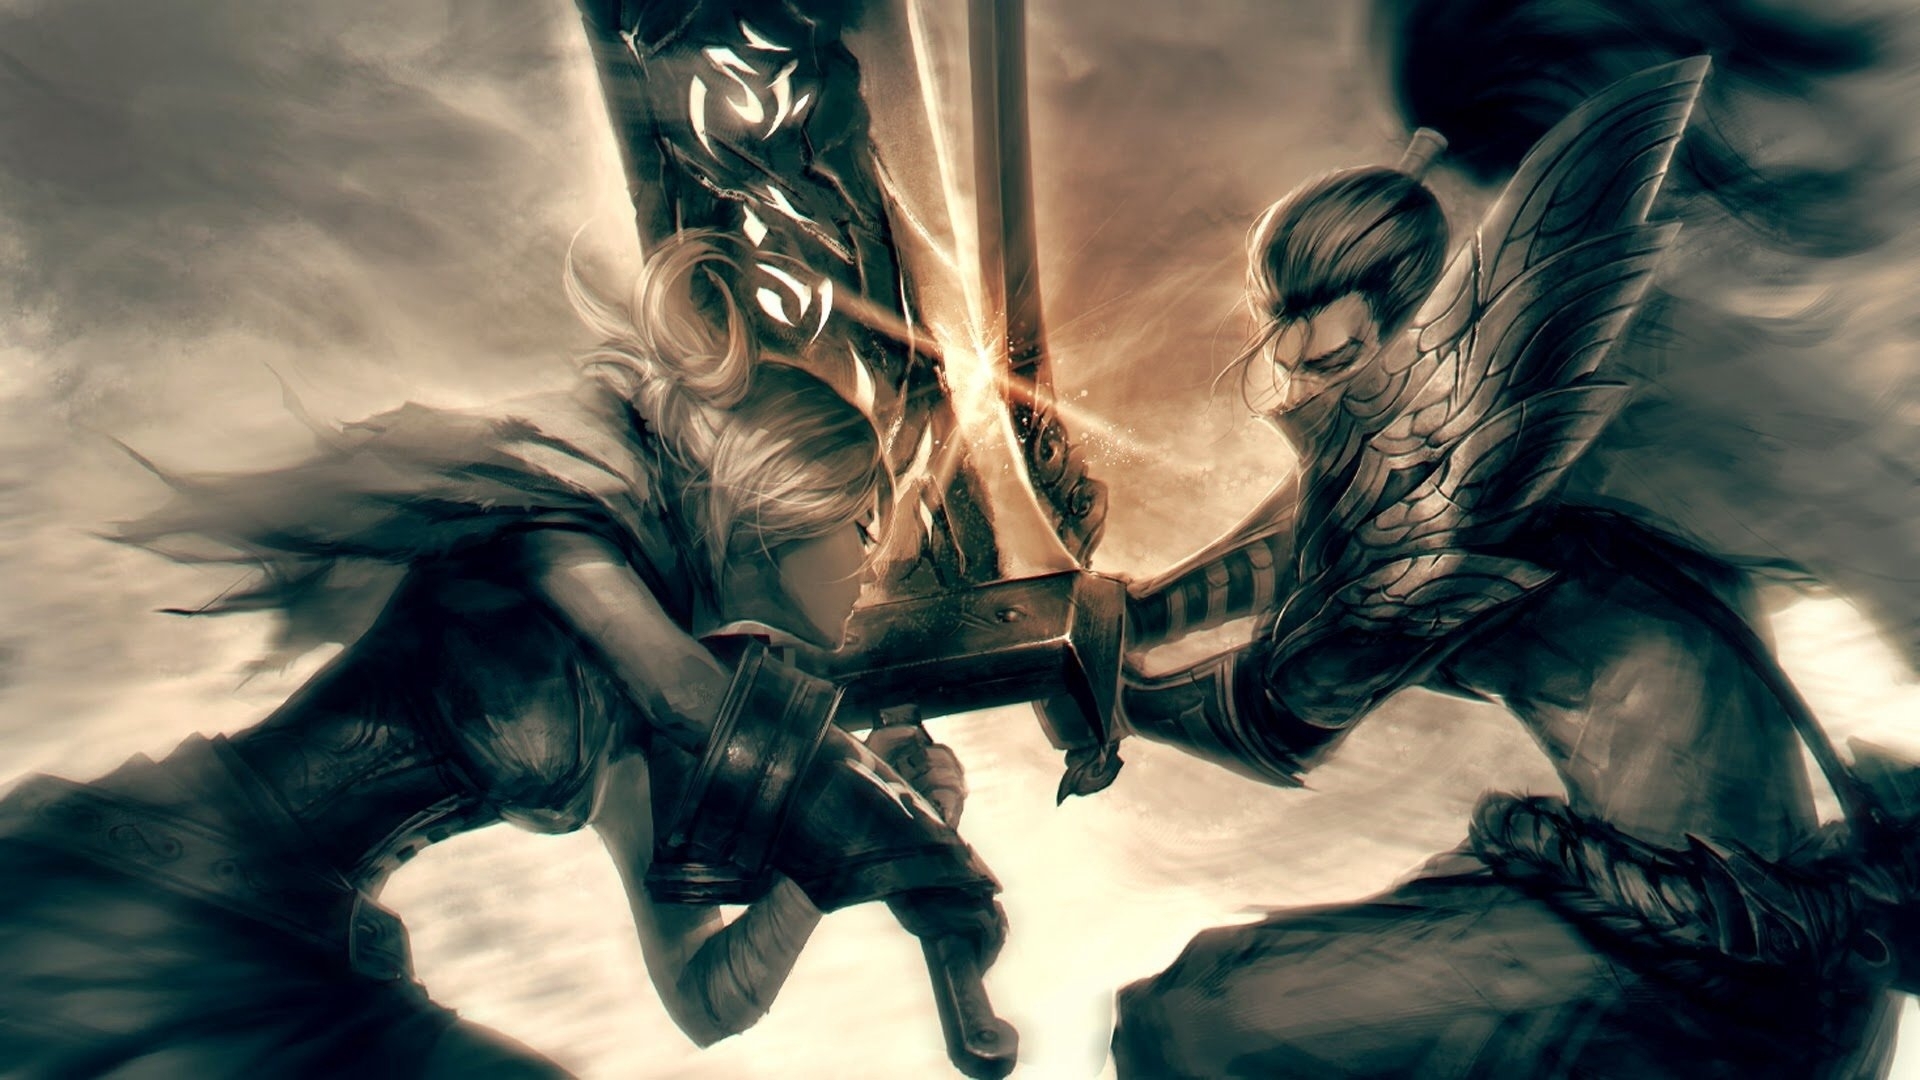 3512 league of legends hd wallpapers | background images - wallpaper